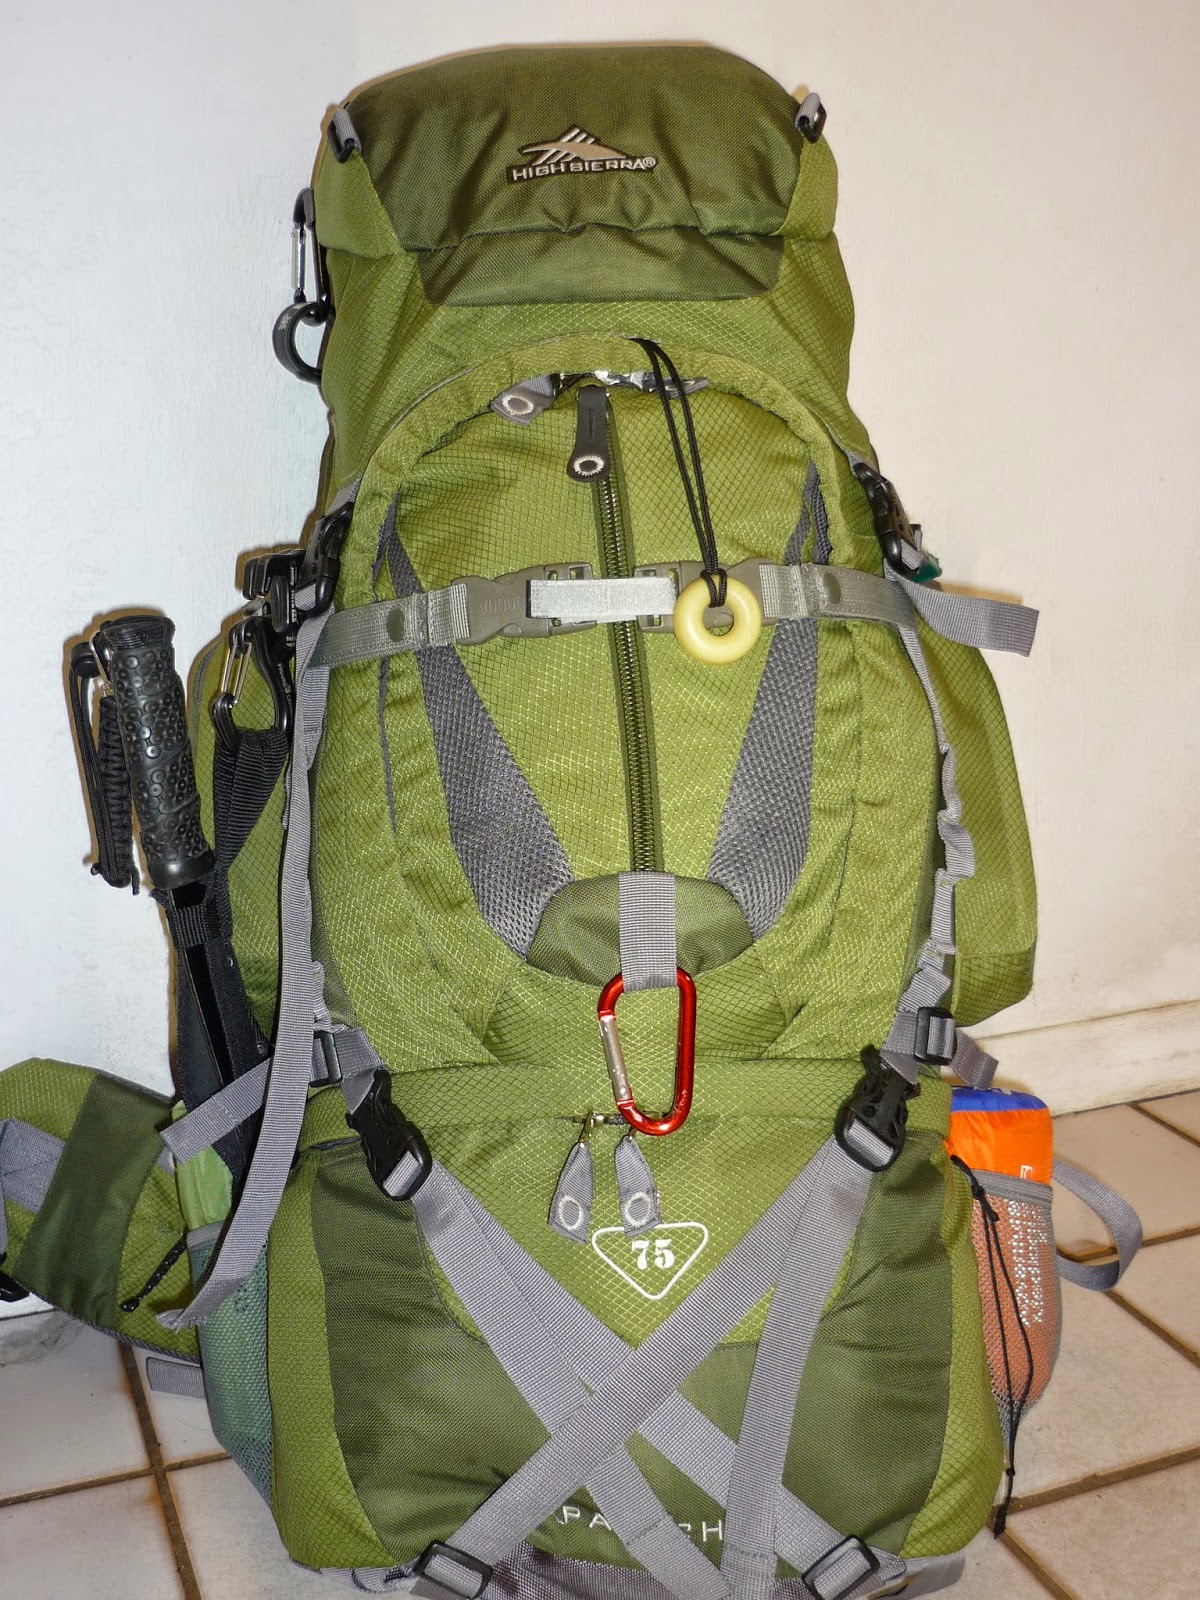 Blue Collar Prepping: My Bug-Out Bag: Part 2 of Many